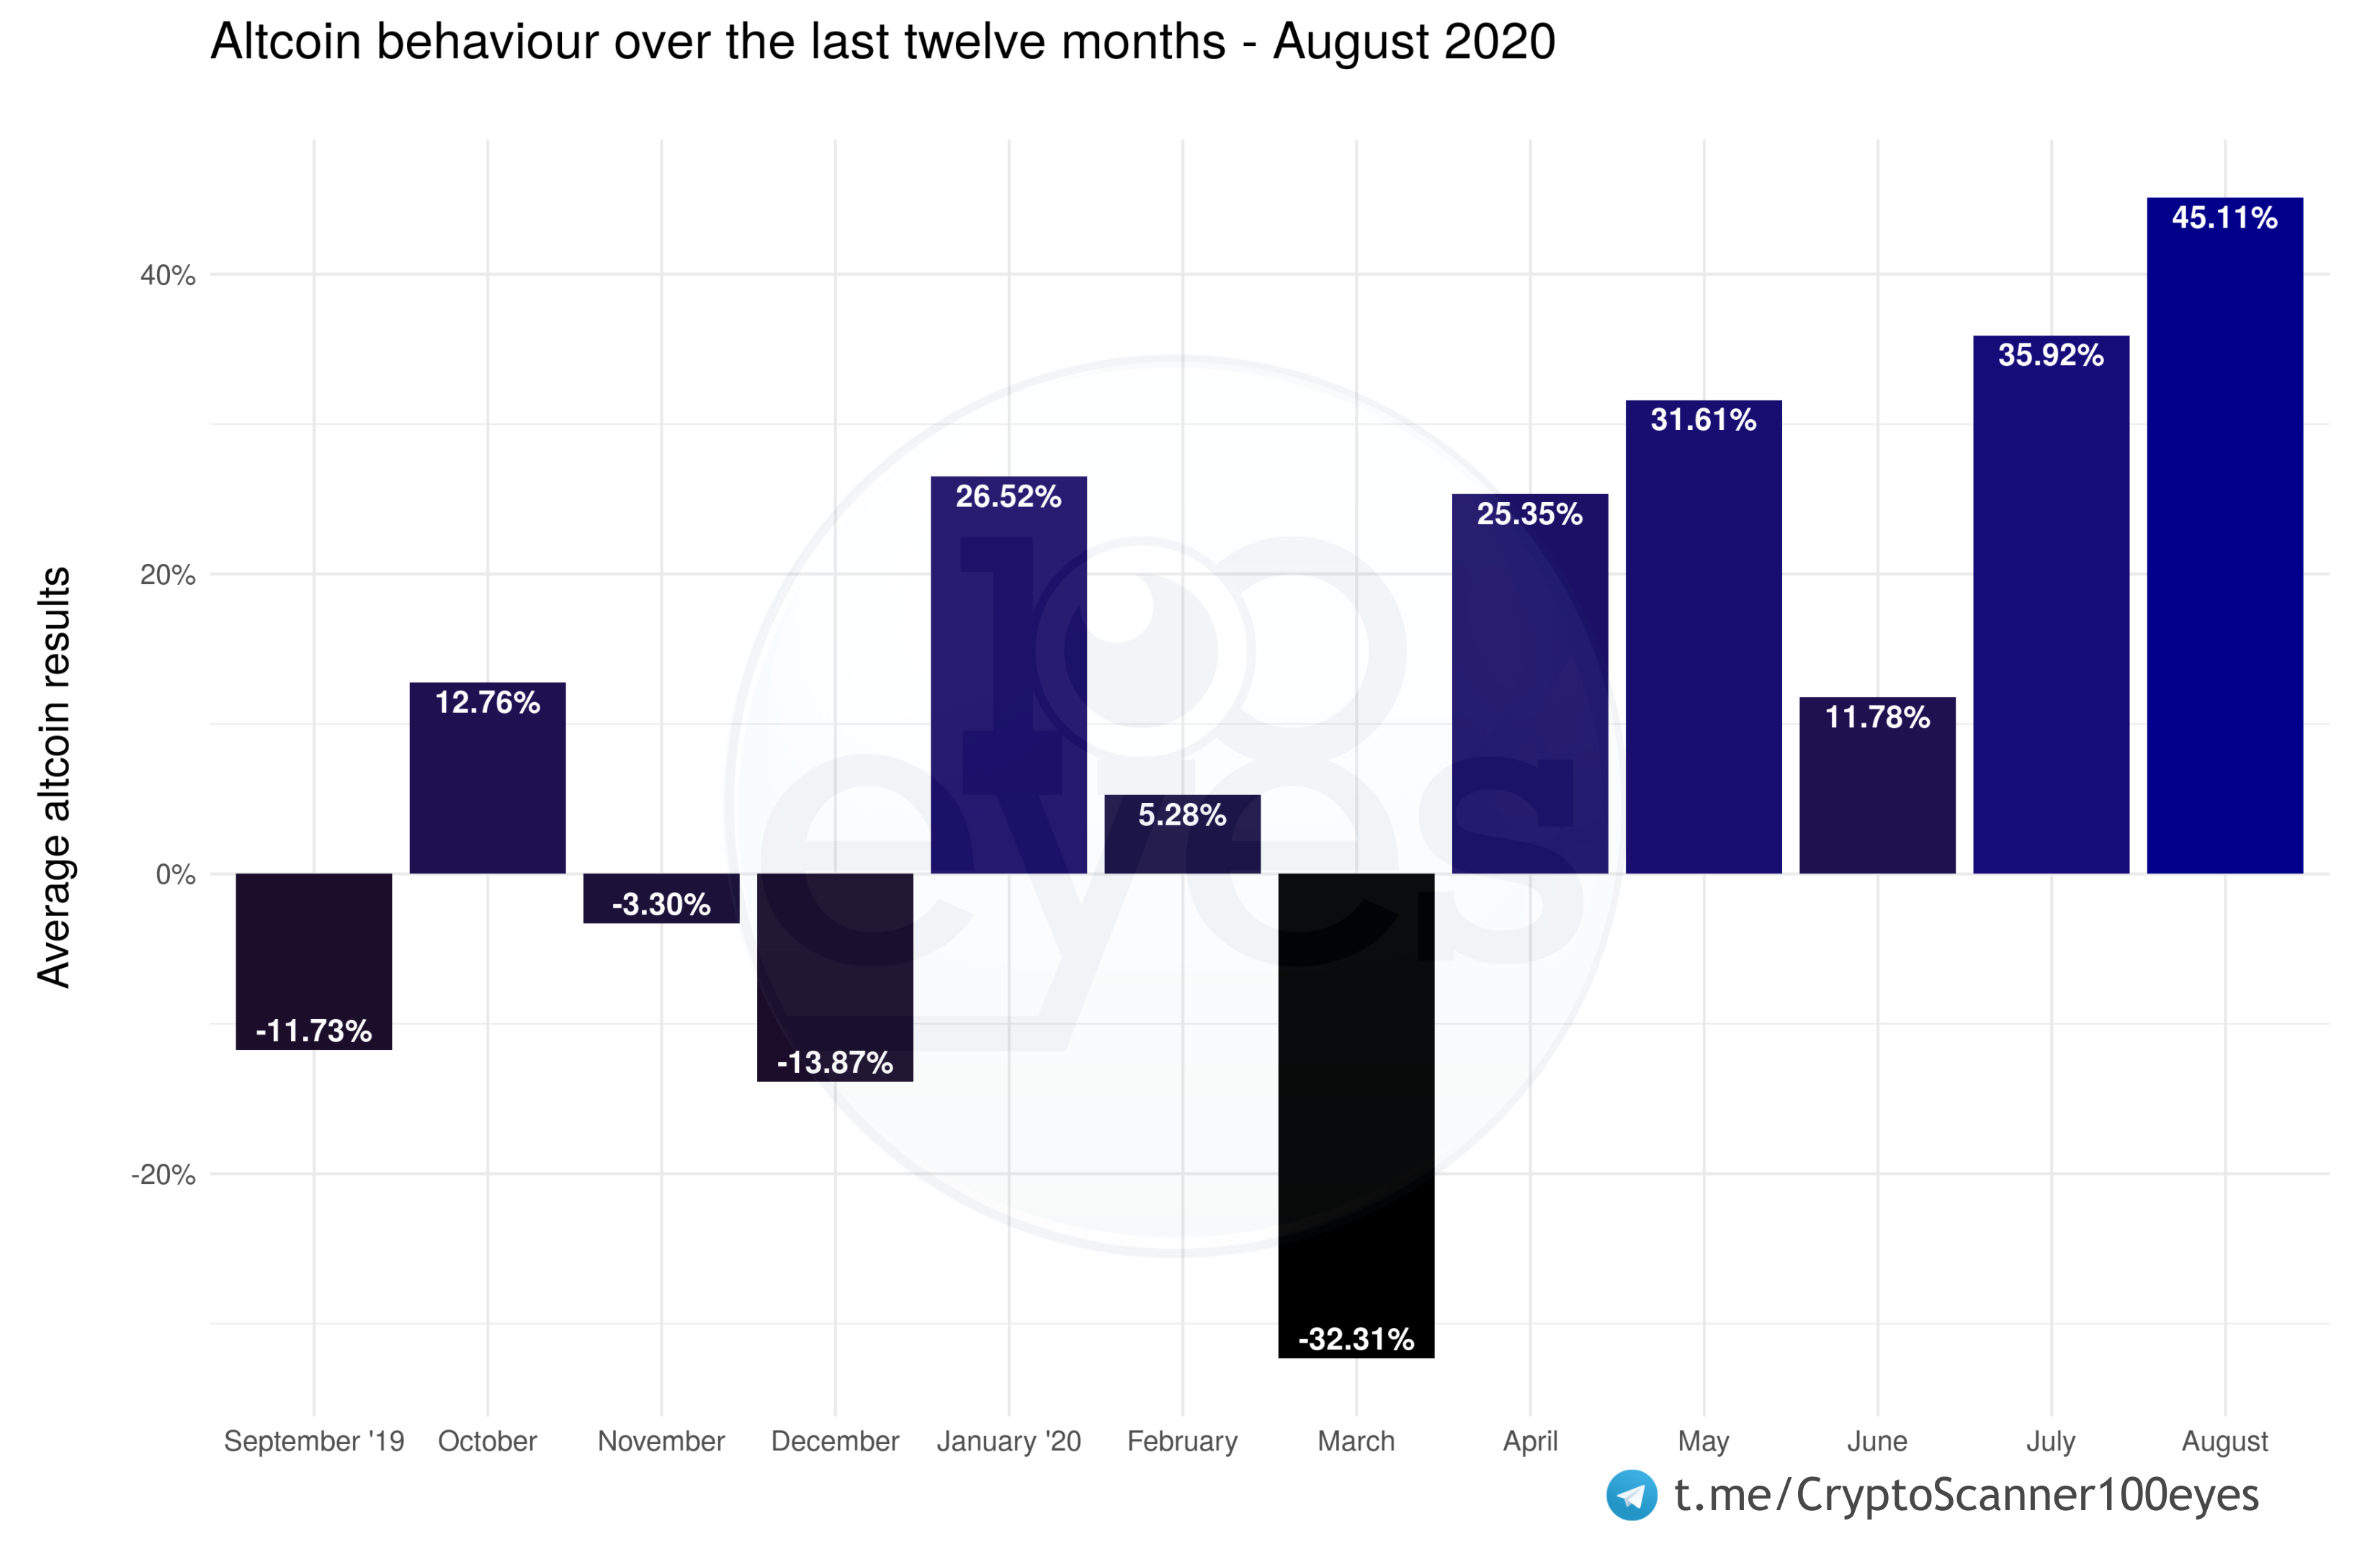 Altcoins had a massive “altcoin season”-like gain. Overall 95% of all altcoins had a positive month and on average altcoins gained over 45% in dollar value.